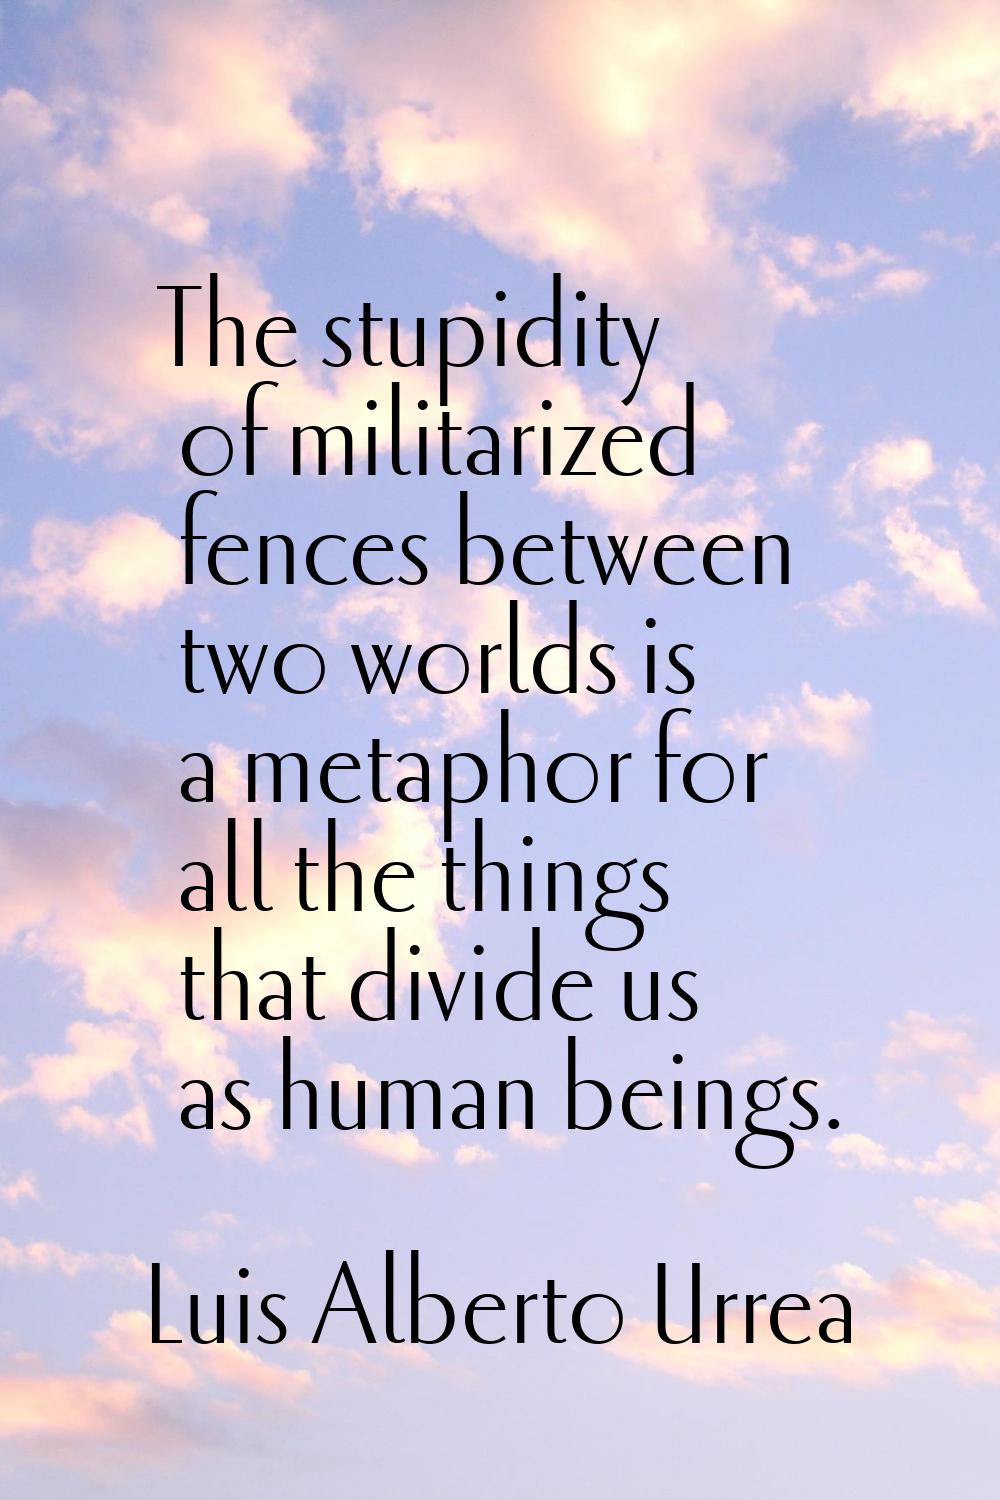 The stupidity of militarized fences between two worlds is a metaphor for all the things that divide